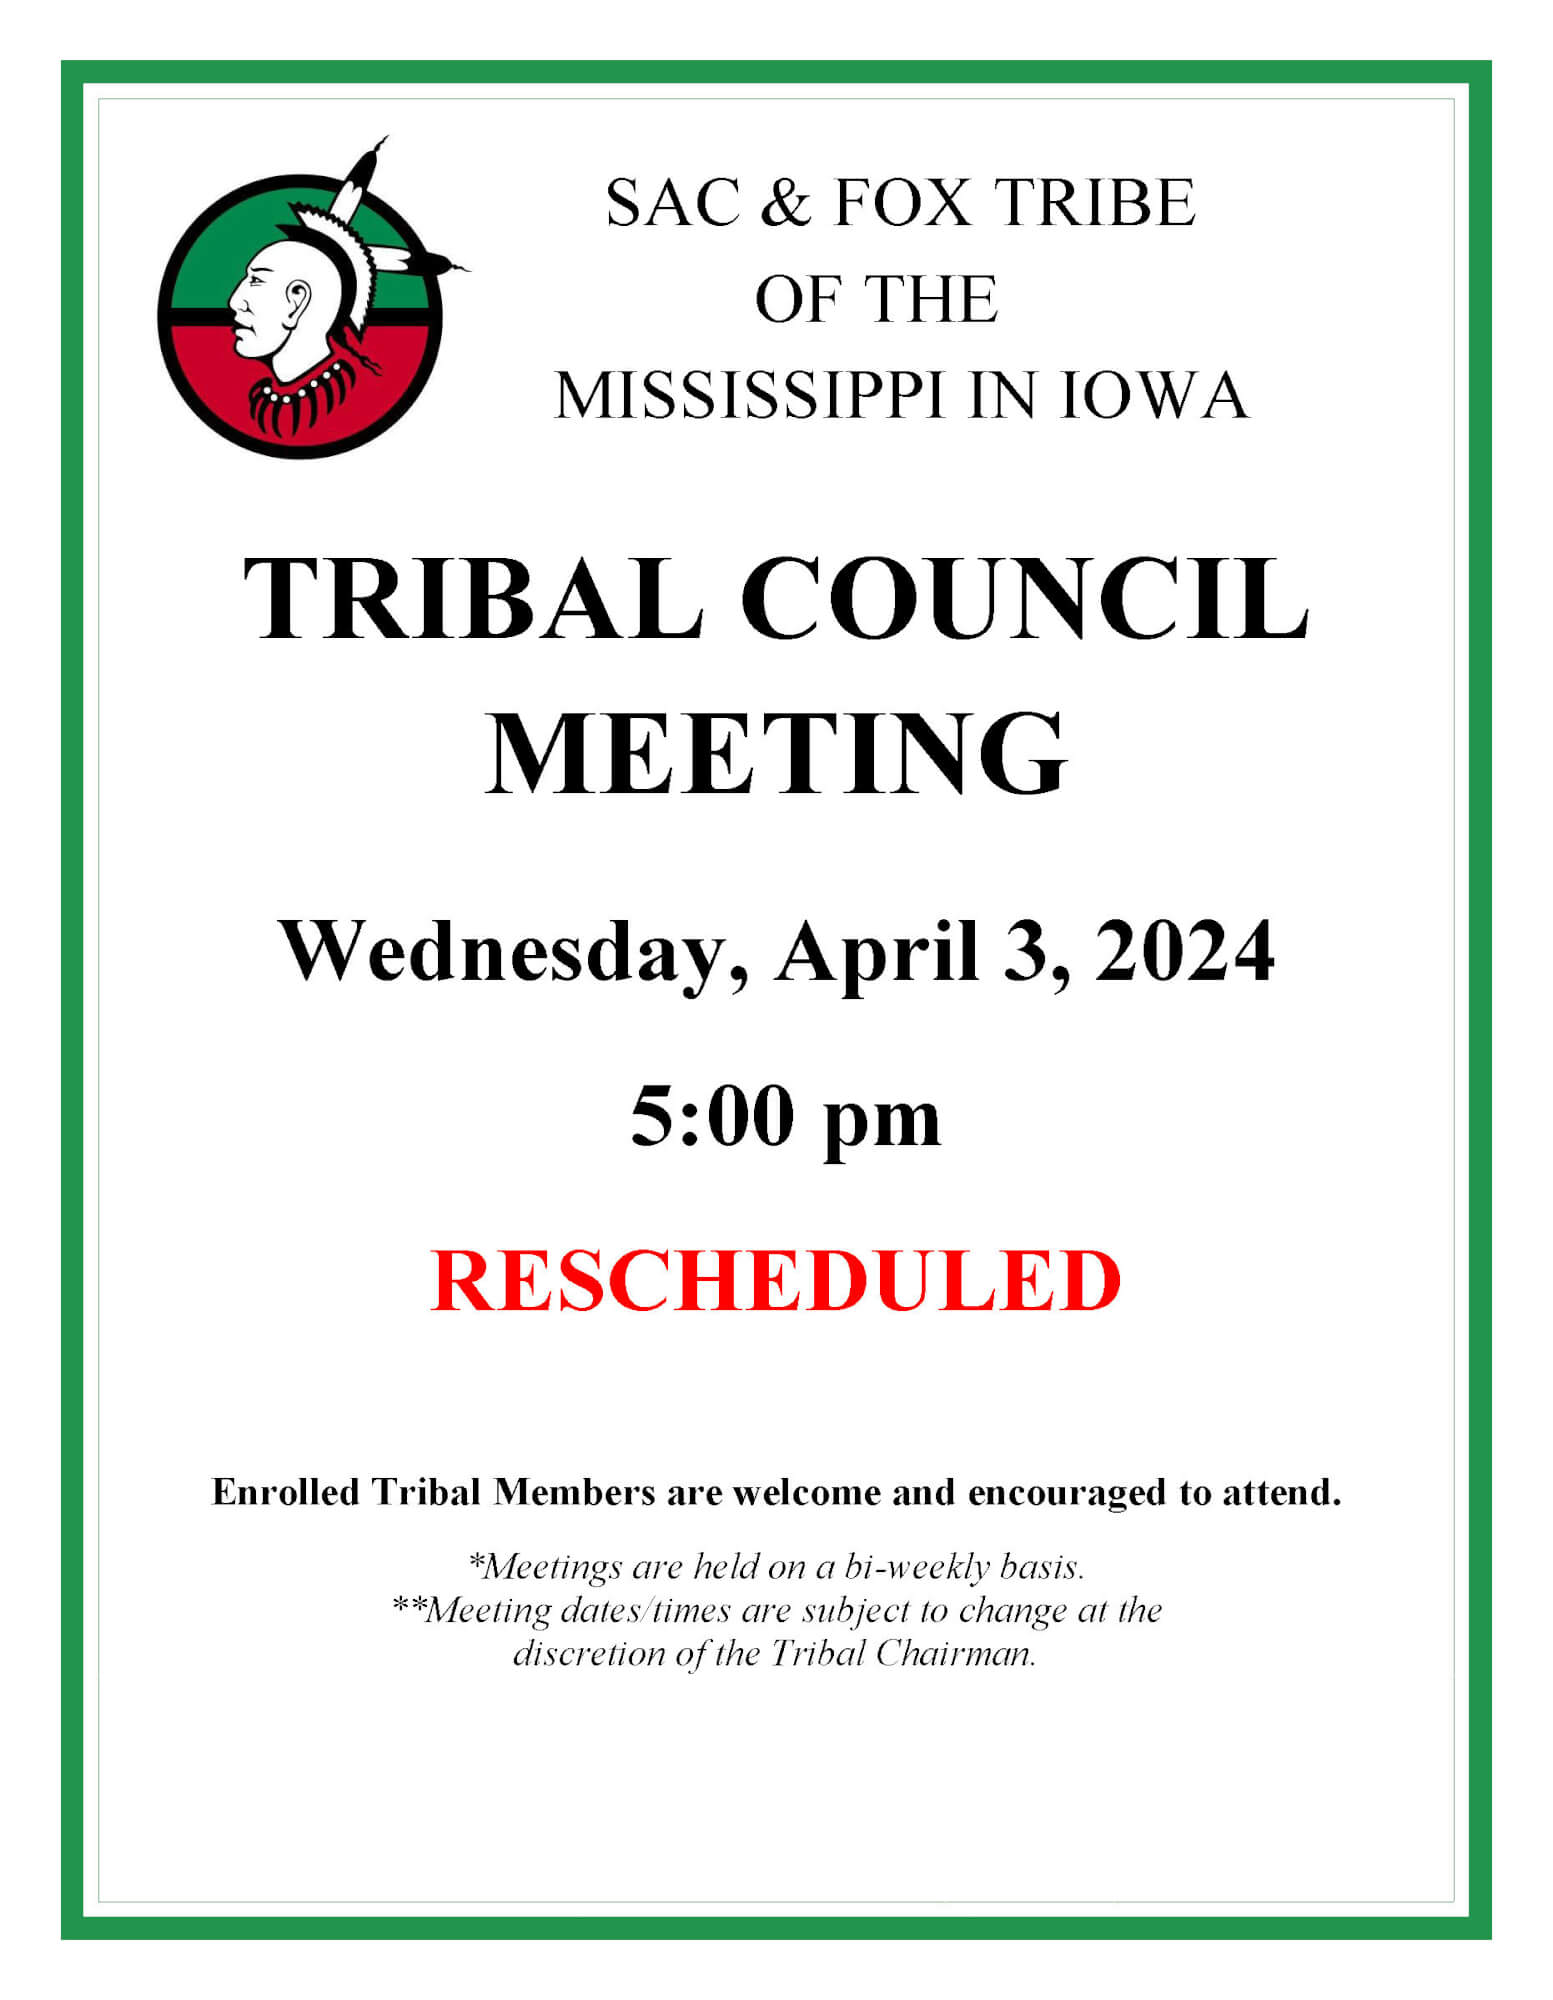 Tribal Council Meeting Rescheduled to April 3